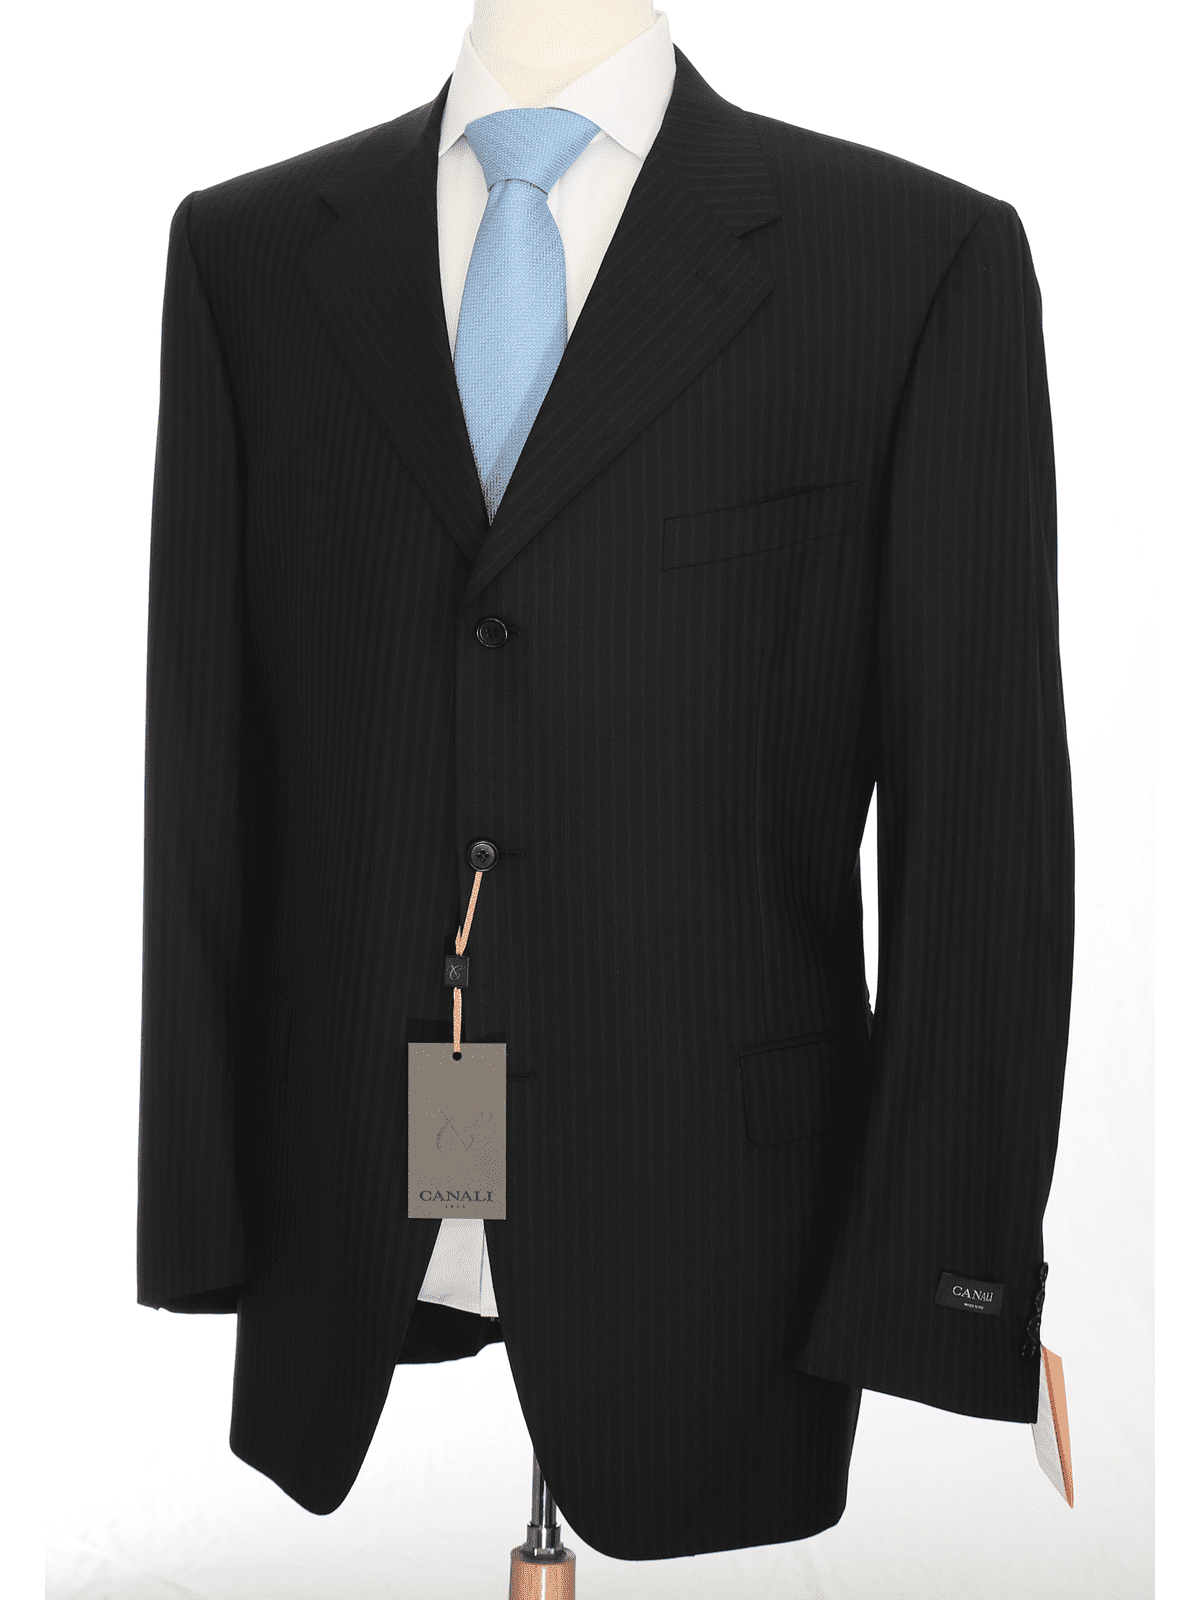 Canali SUITS Canali Mens 50l 62 Drop 6 Classic Fit Black Striped Three Button 100% Wool Suit